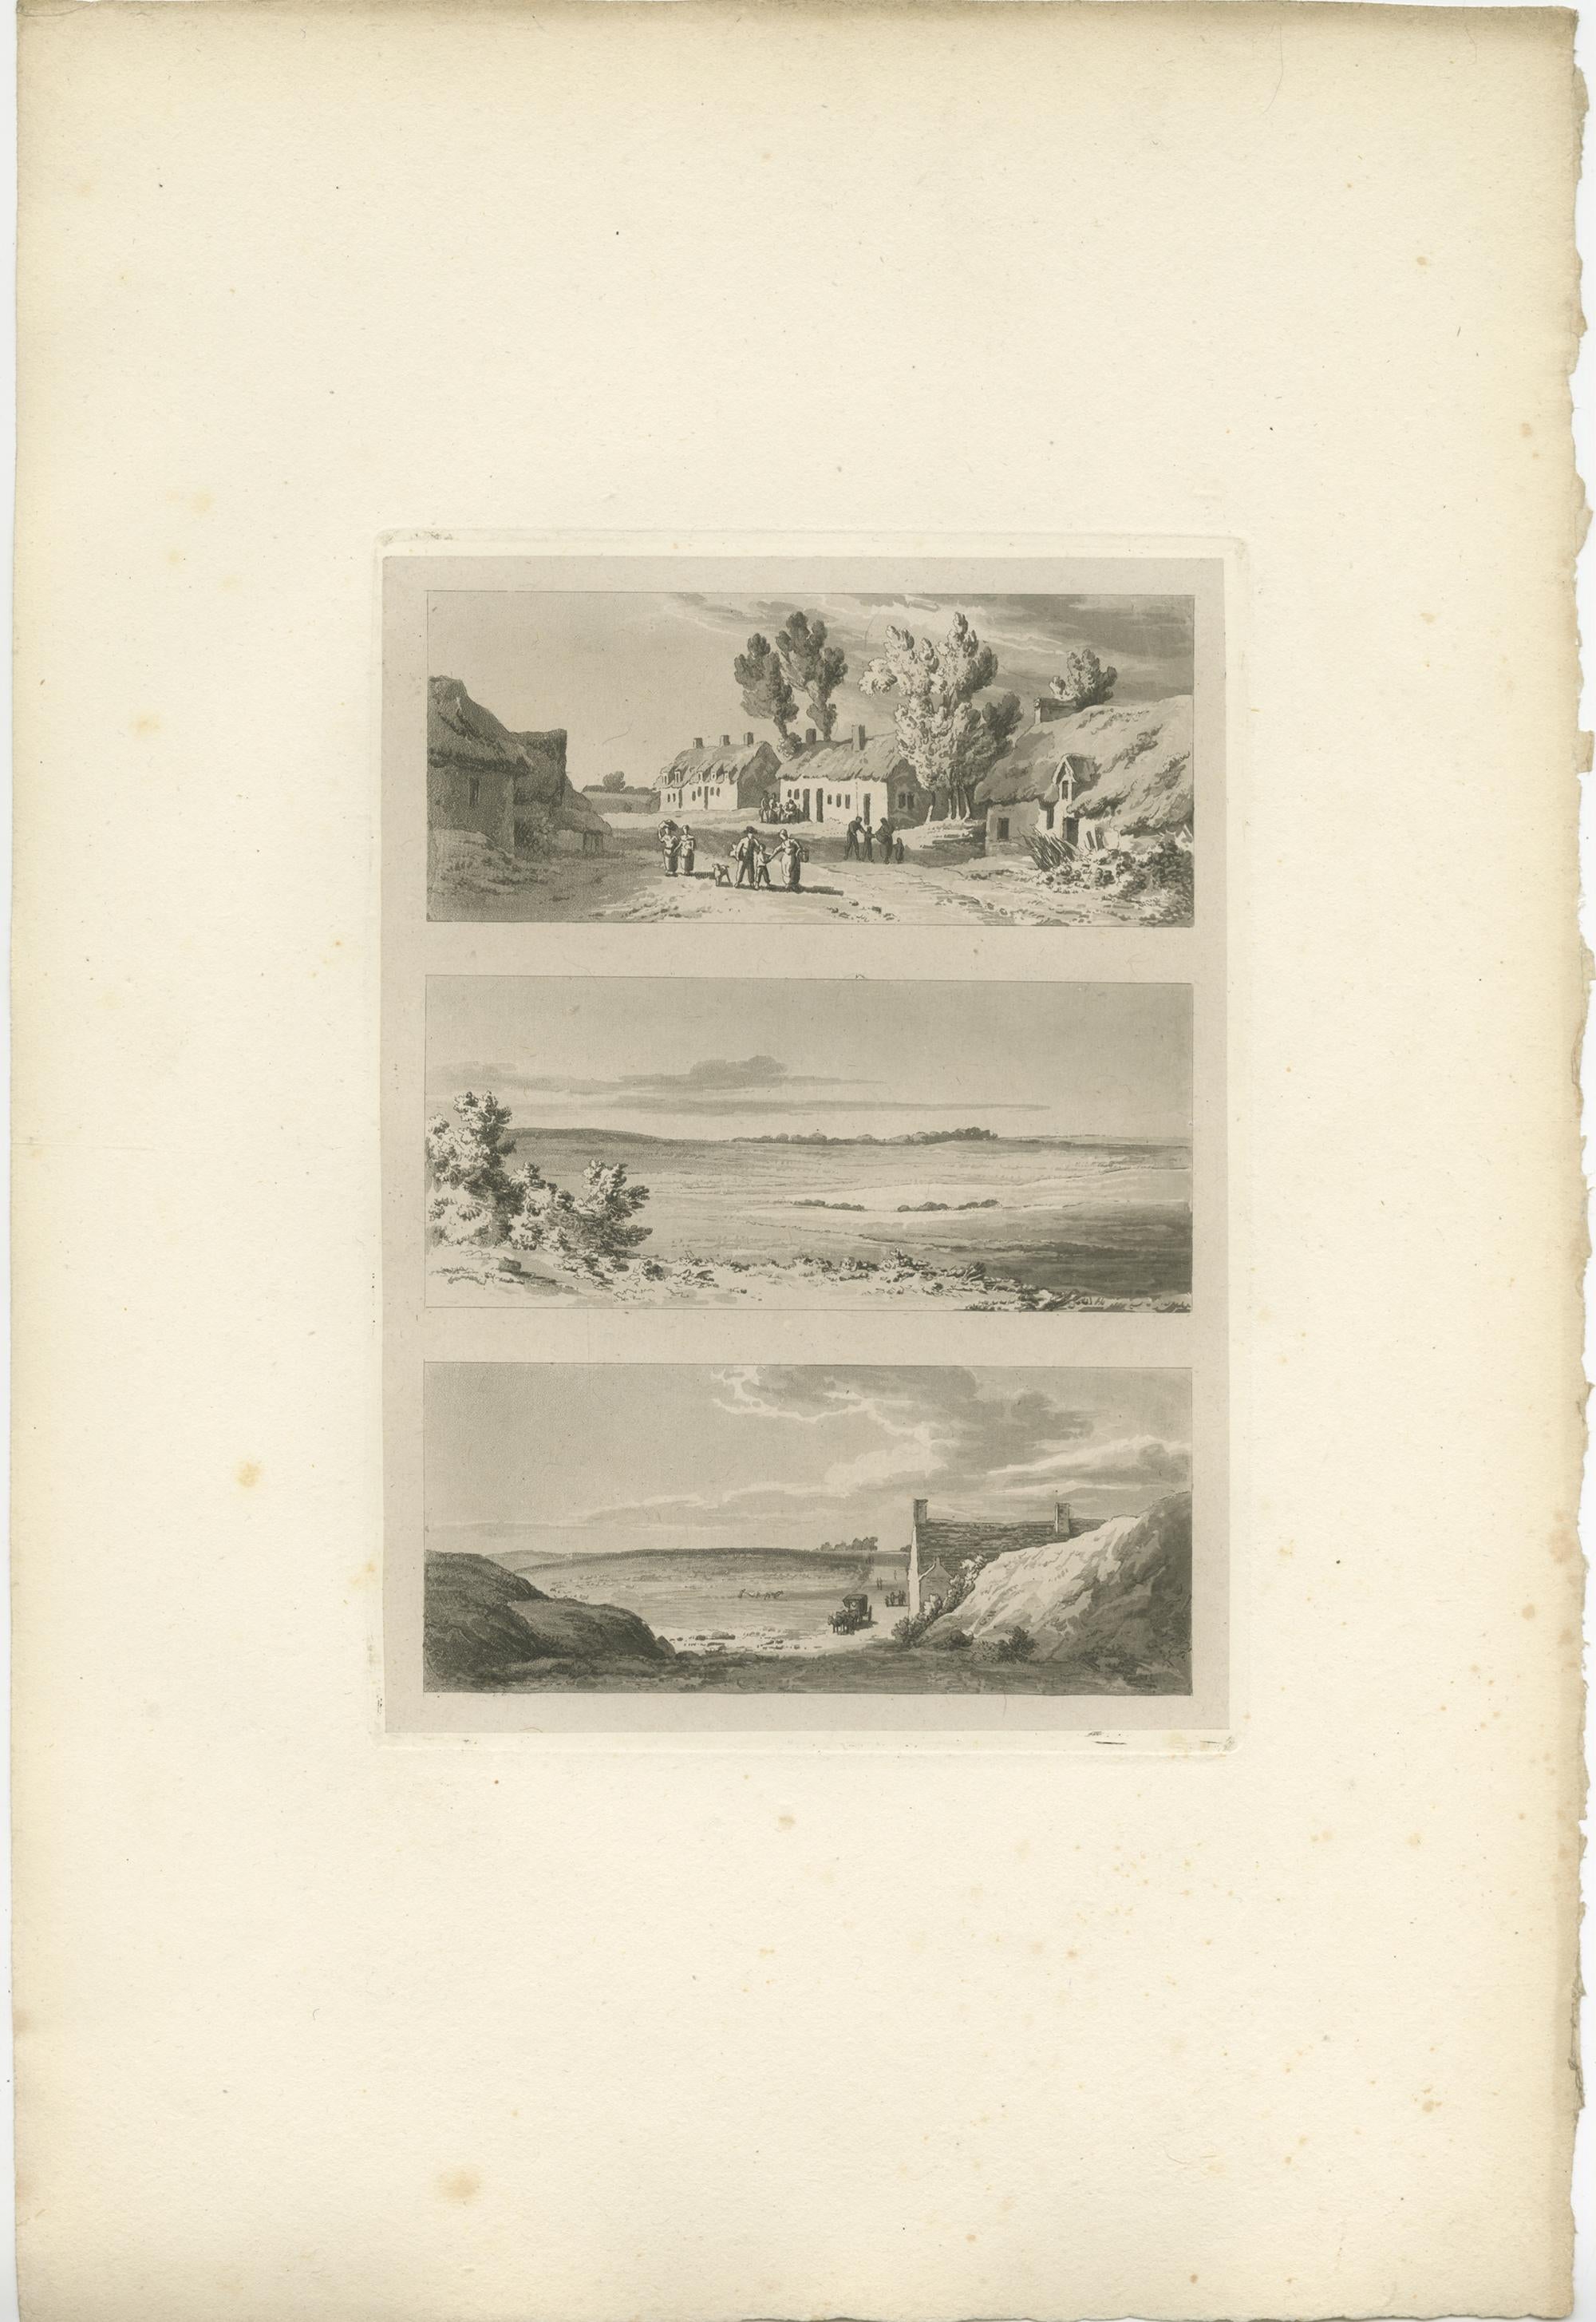 Set of four antique prints with views of Flanders and Holland. Published by or after Robert Hills, circa 1820.